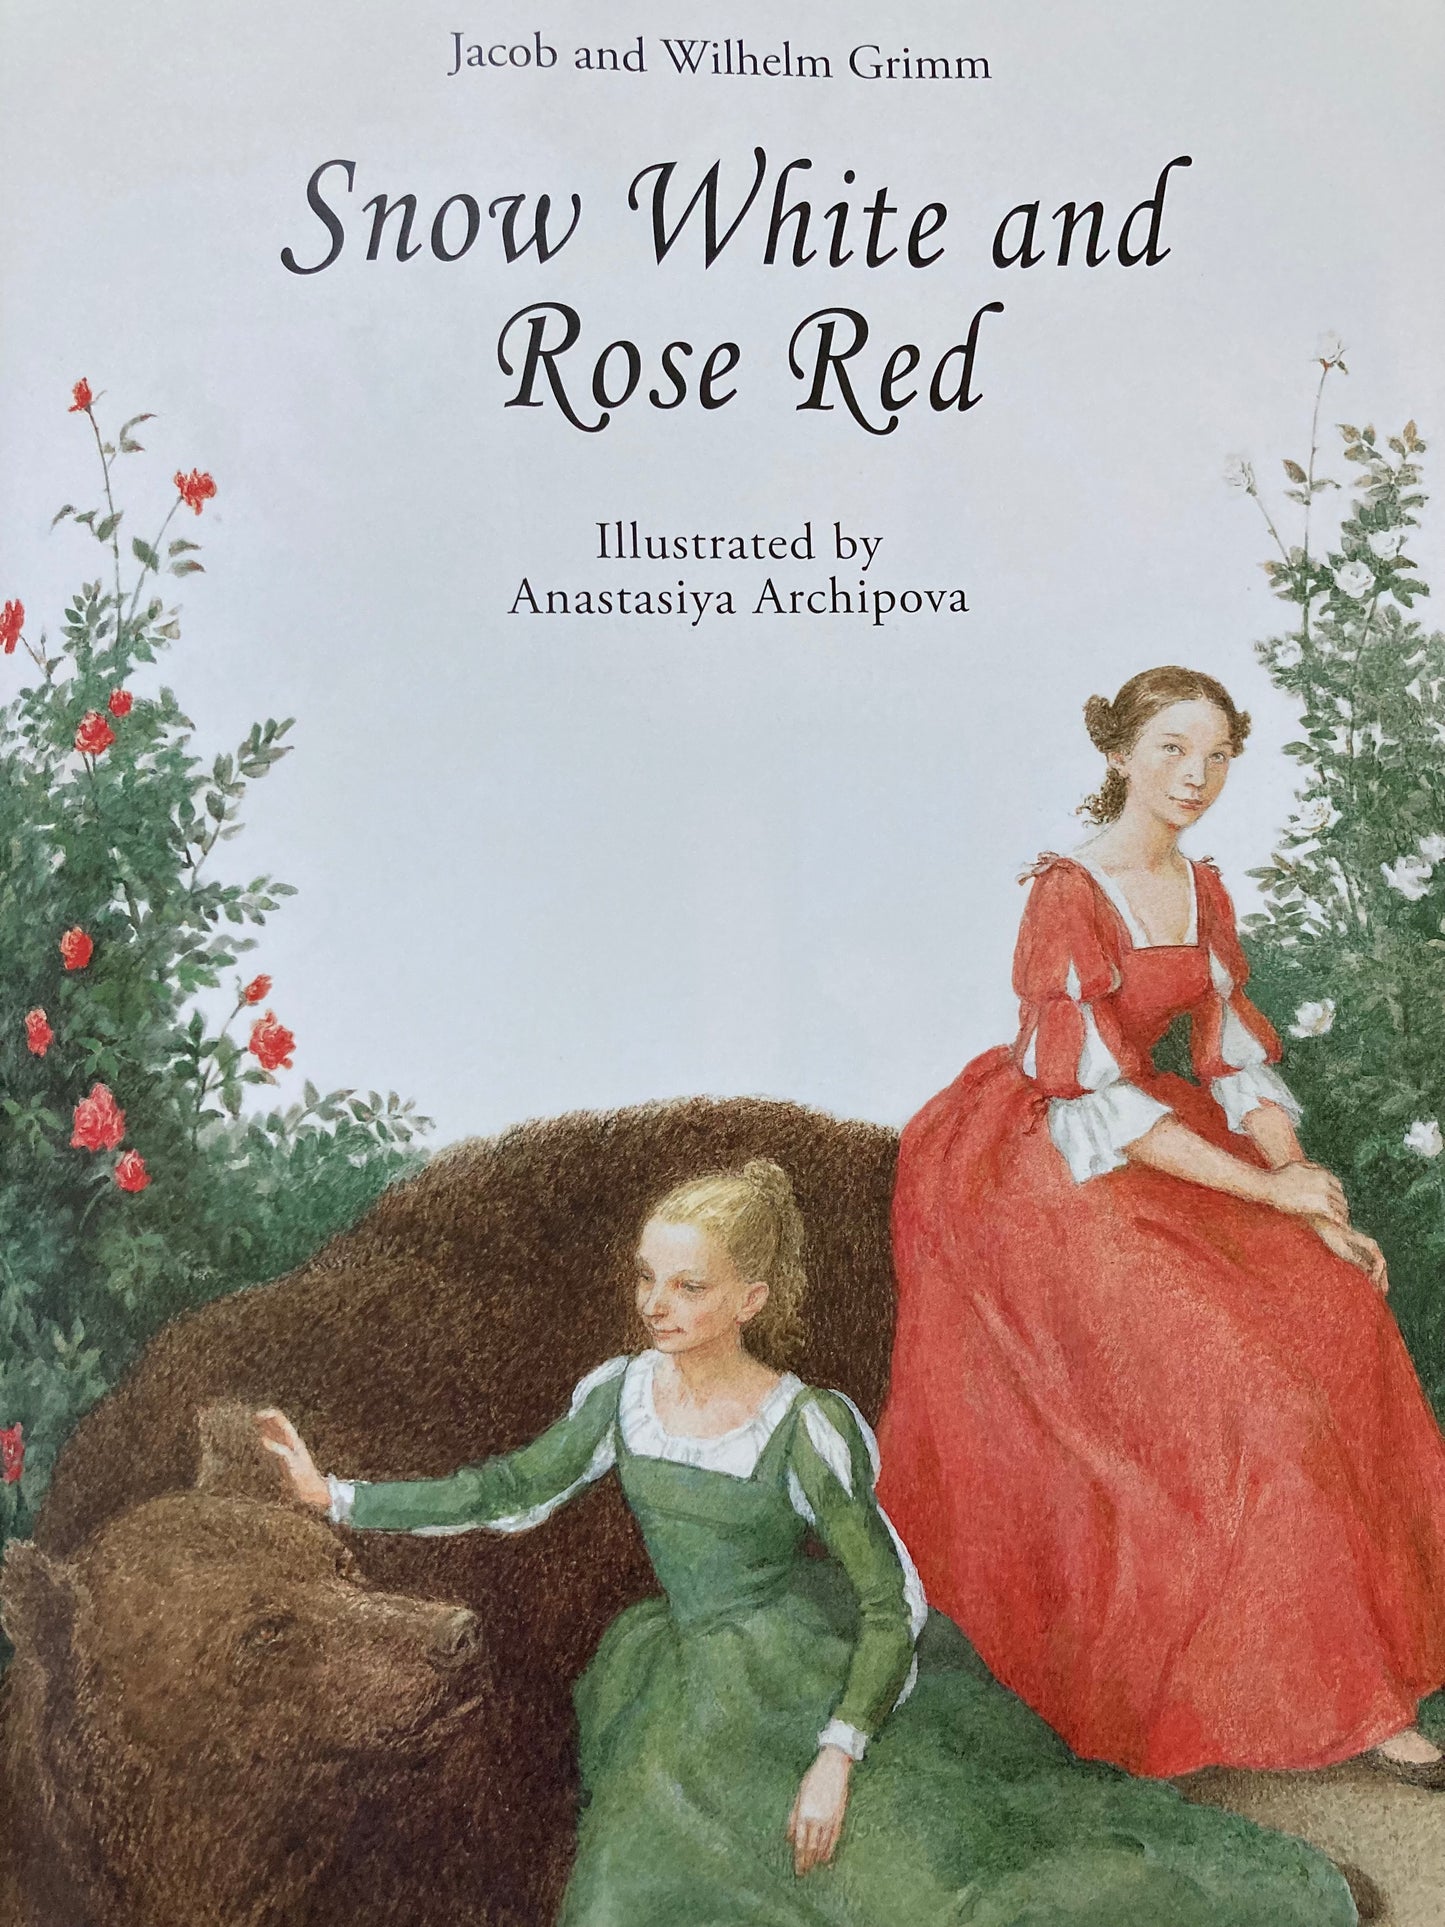 Children's Fairy Tale Book - SNOW WHITE AND ROSE RED